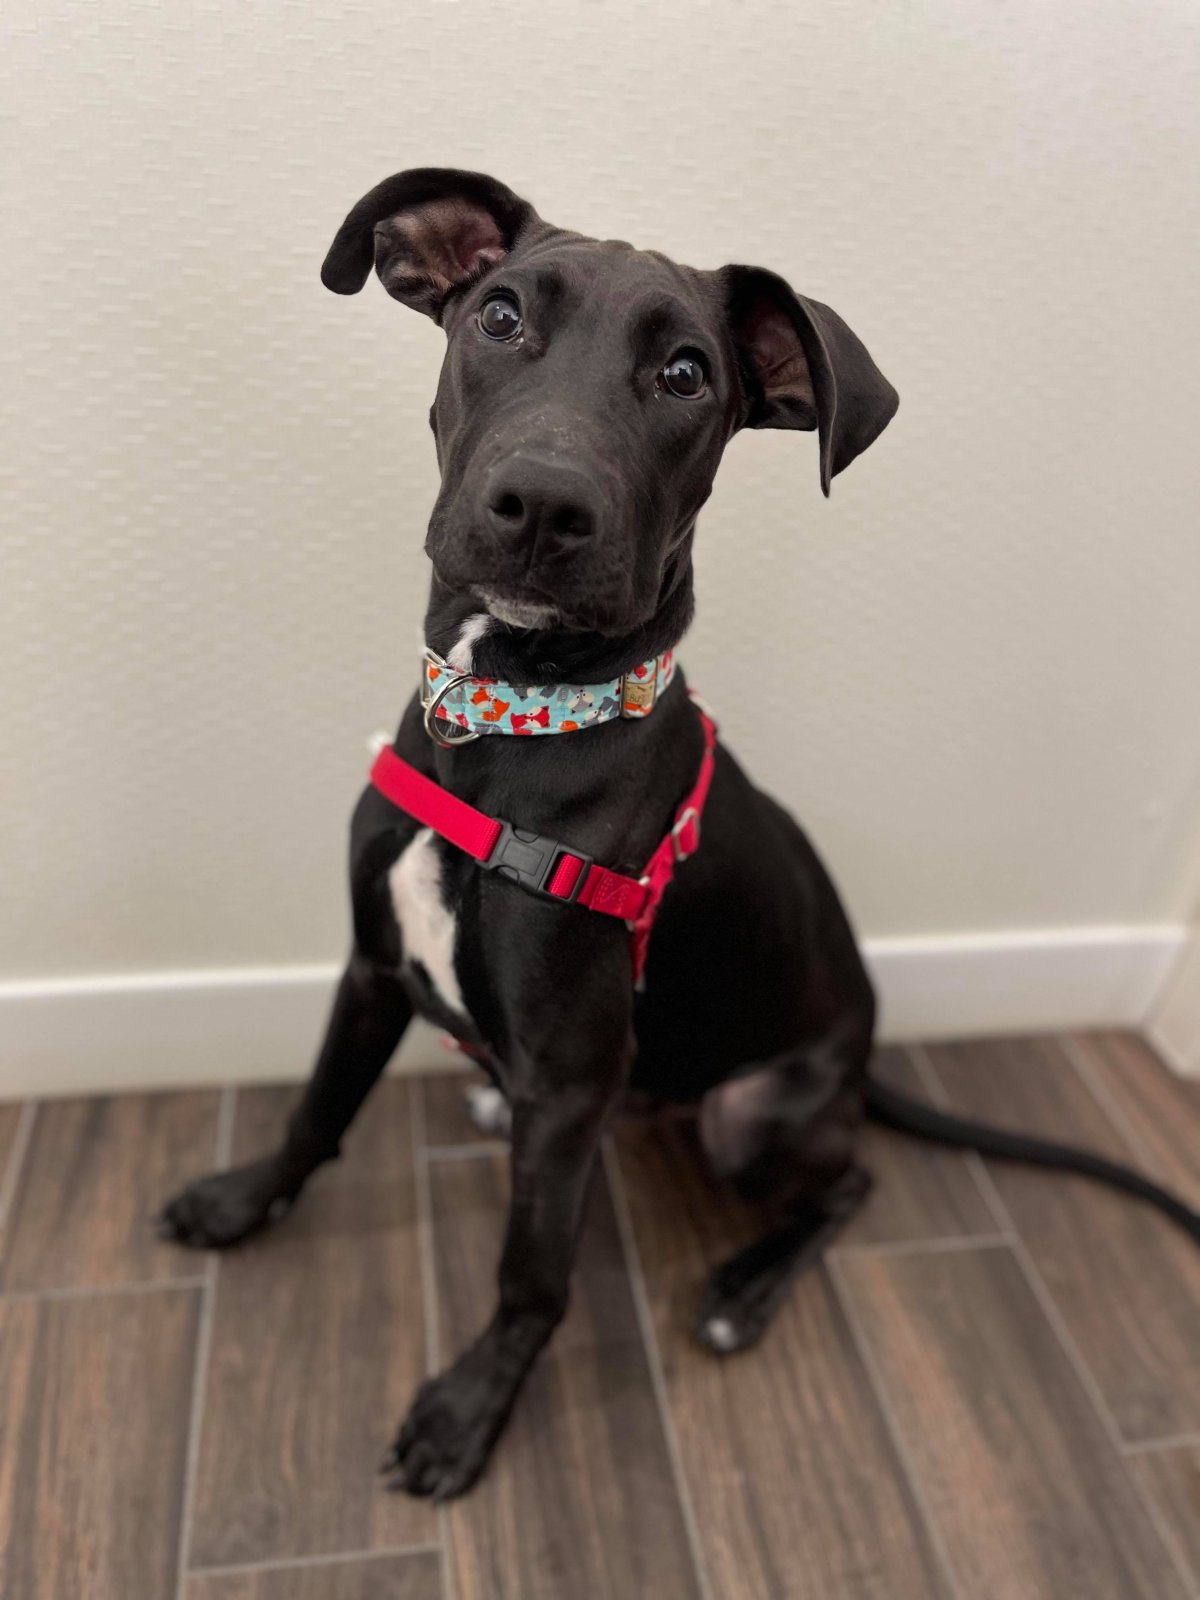 Without heart surgery, Manitoba Underdogs Rescue says Sonny, a 5-month-old Great Dane mix, isn't expected to live beyond another year or two.